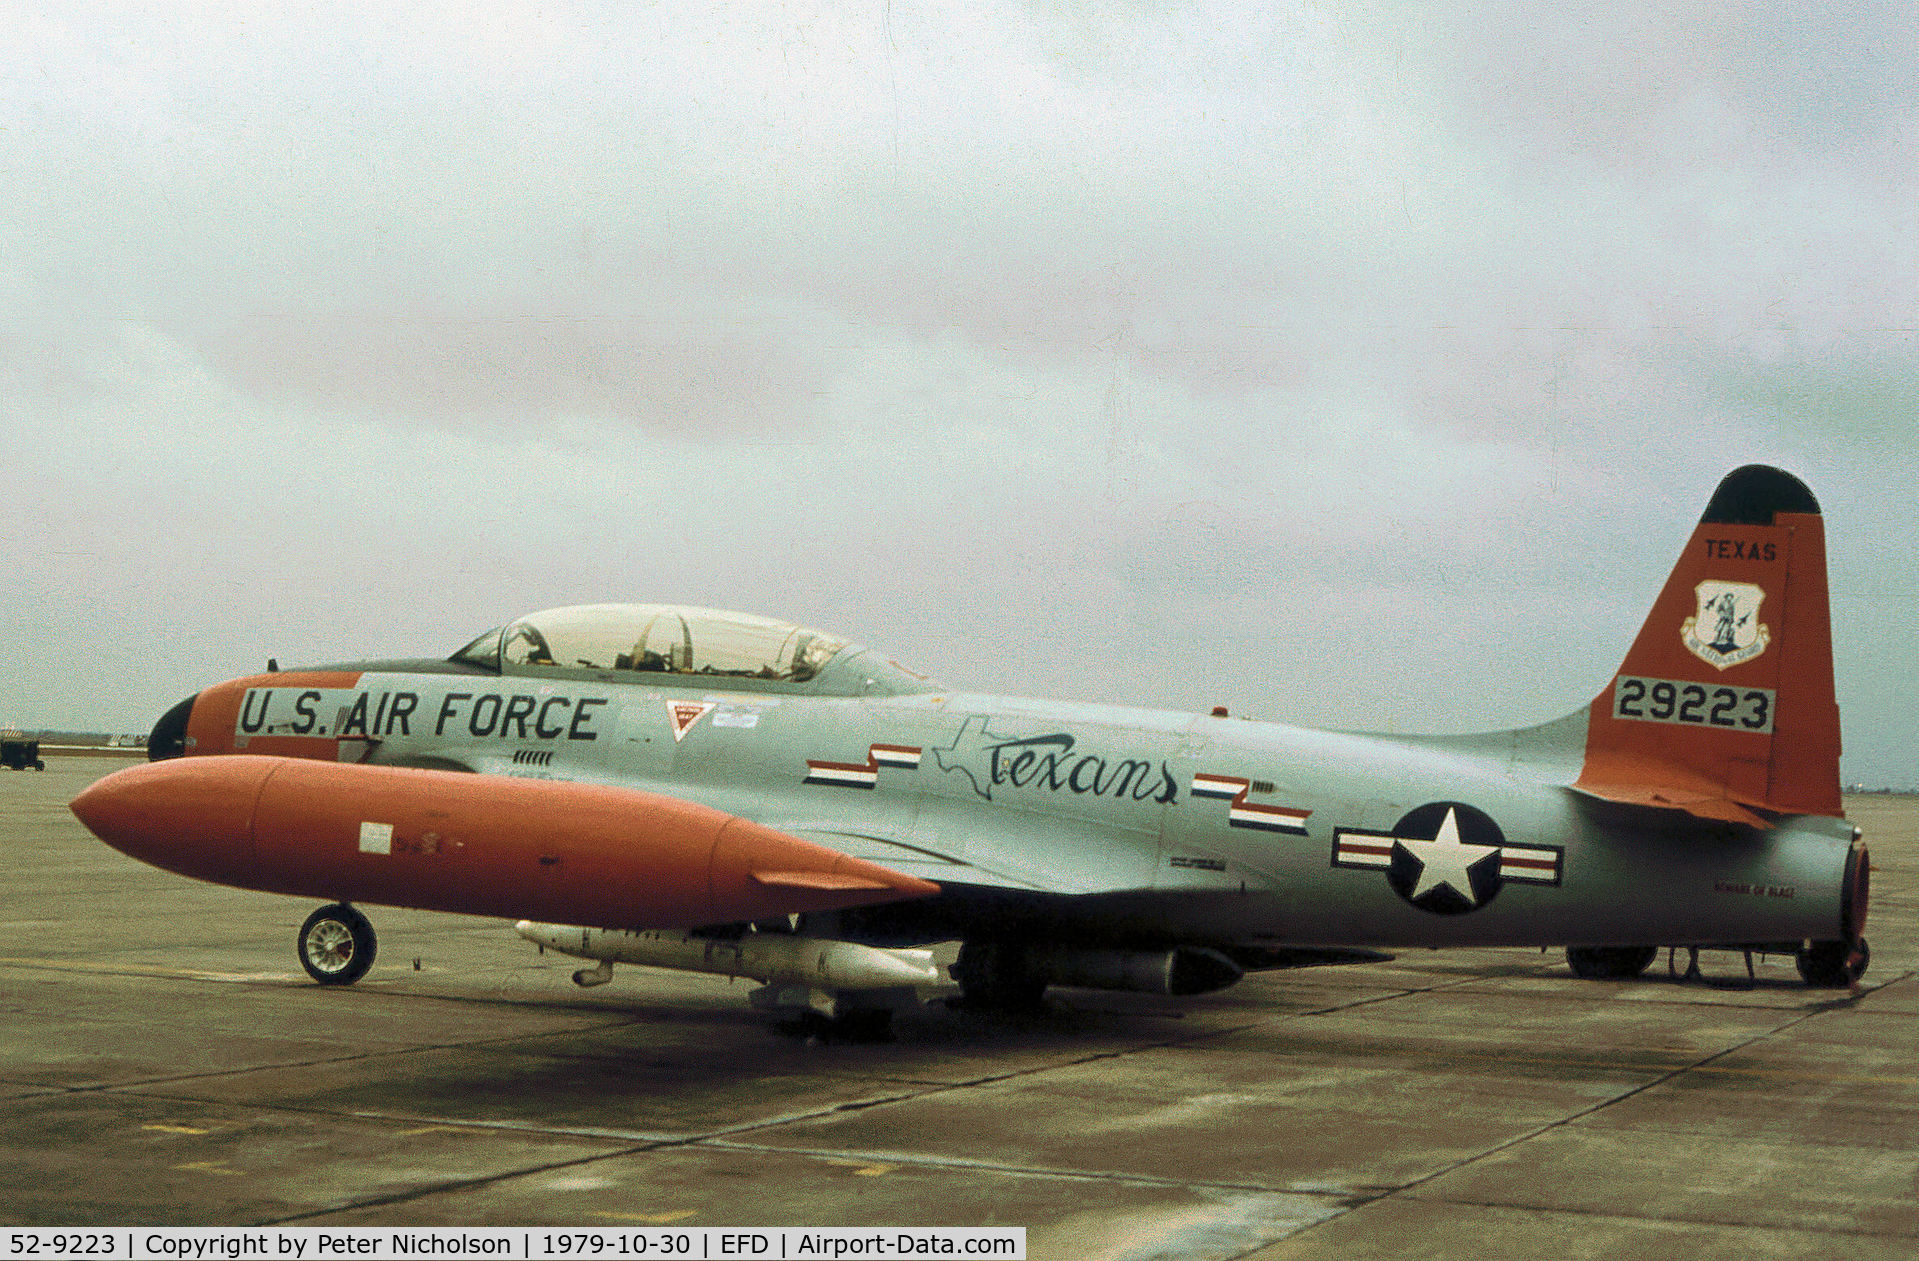 52-9223, 1953 Lockheed T-33A Shooting Star C/N 580-7289, T-33A Shooting Star of the 111st Fighter Interceptor Squadron/147th Fighter Interceptor Group on the flight-line at Ellington AFB in October 1979.